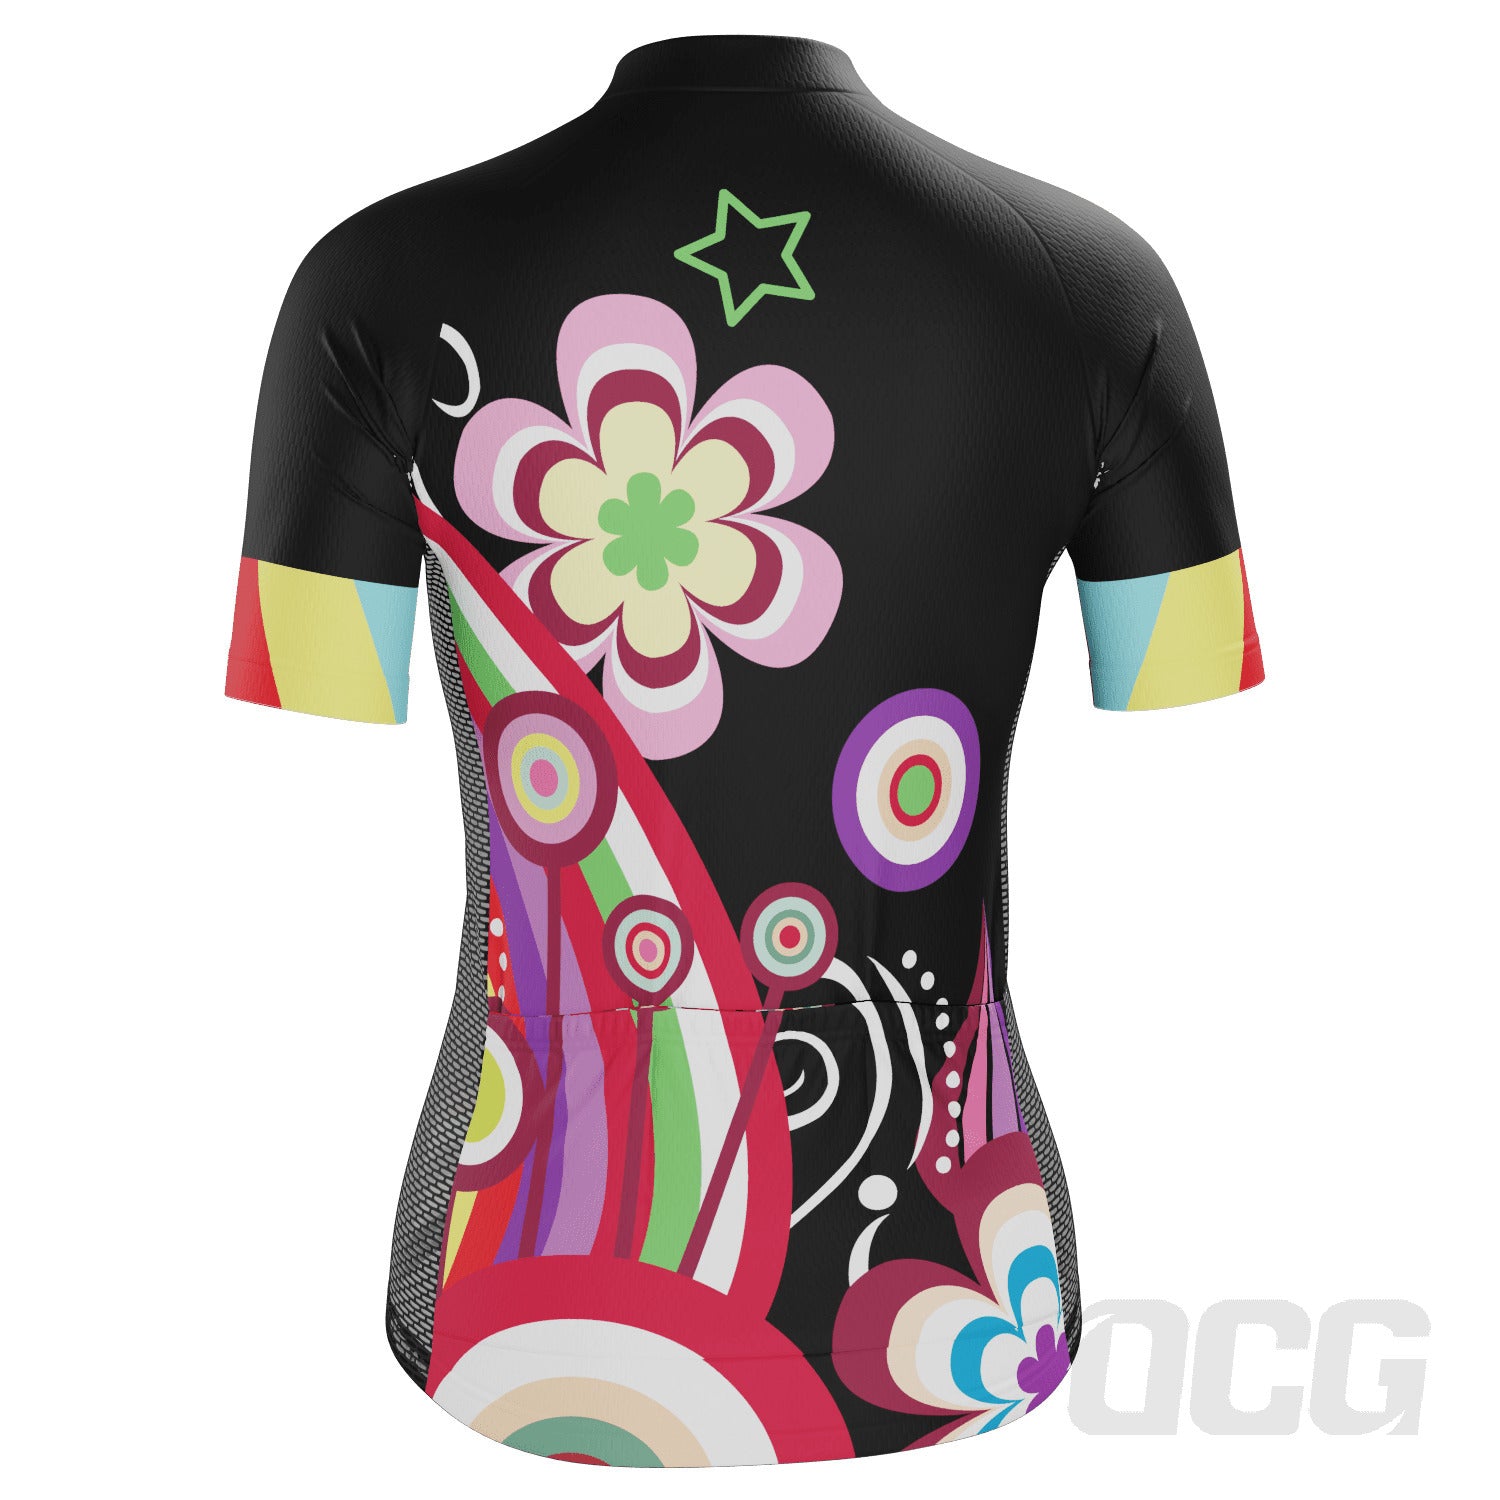 Women's Black Floral Short Sleeve Cycling Jersey